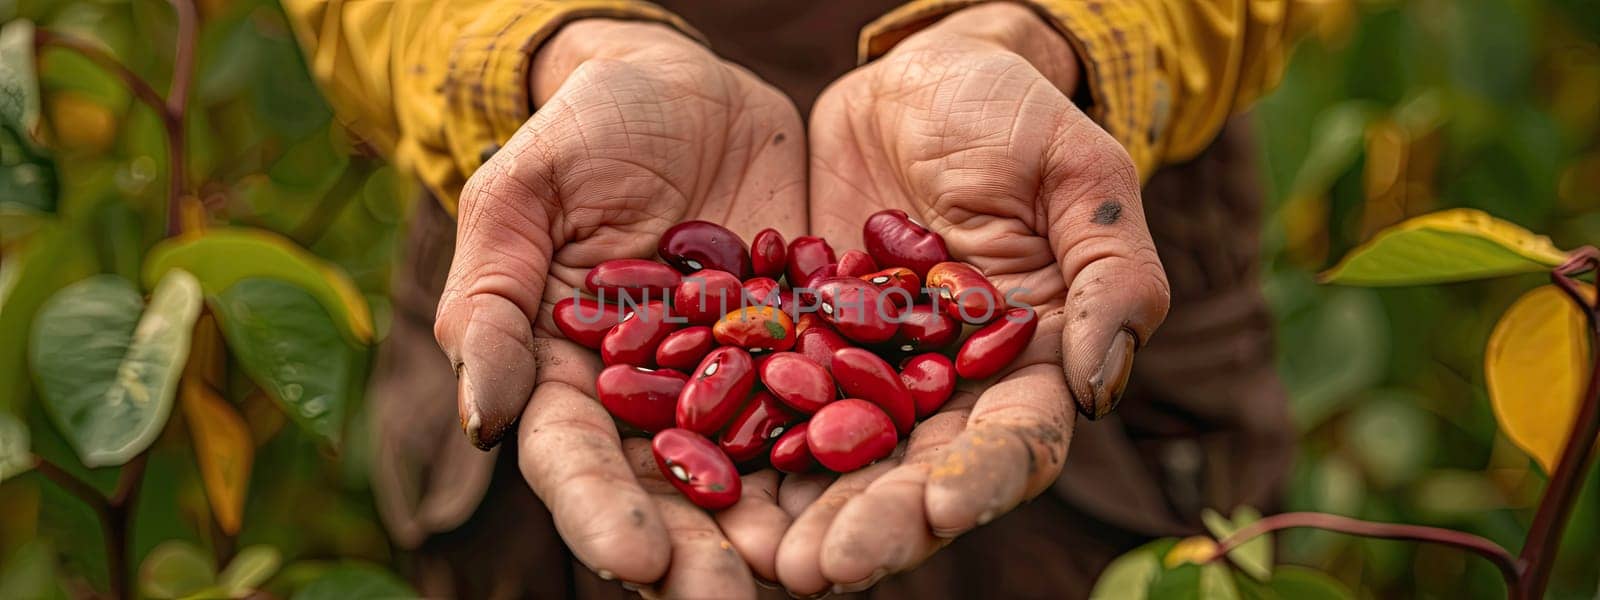 Harvest of beans in the hands of a woman in the garden. Selective focus. nature.